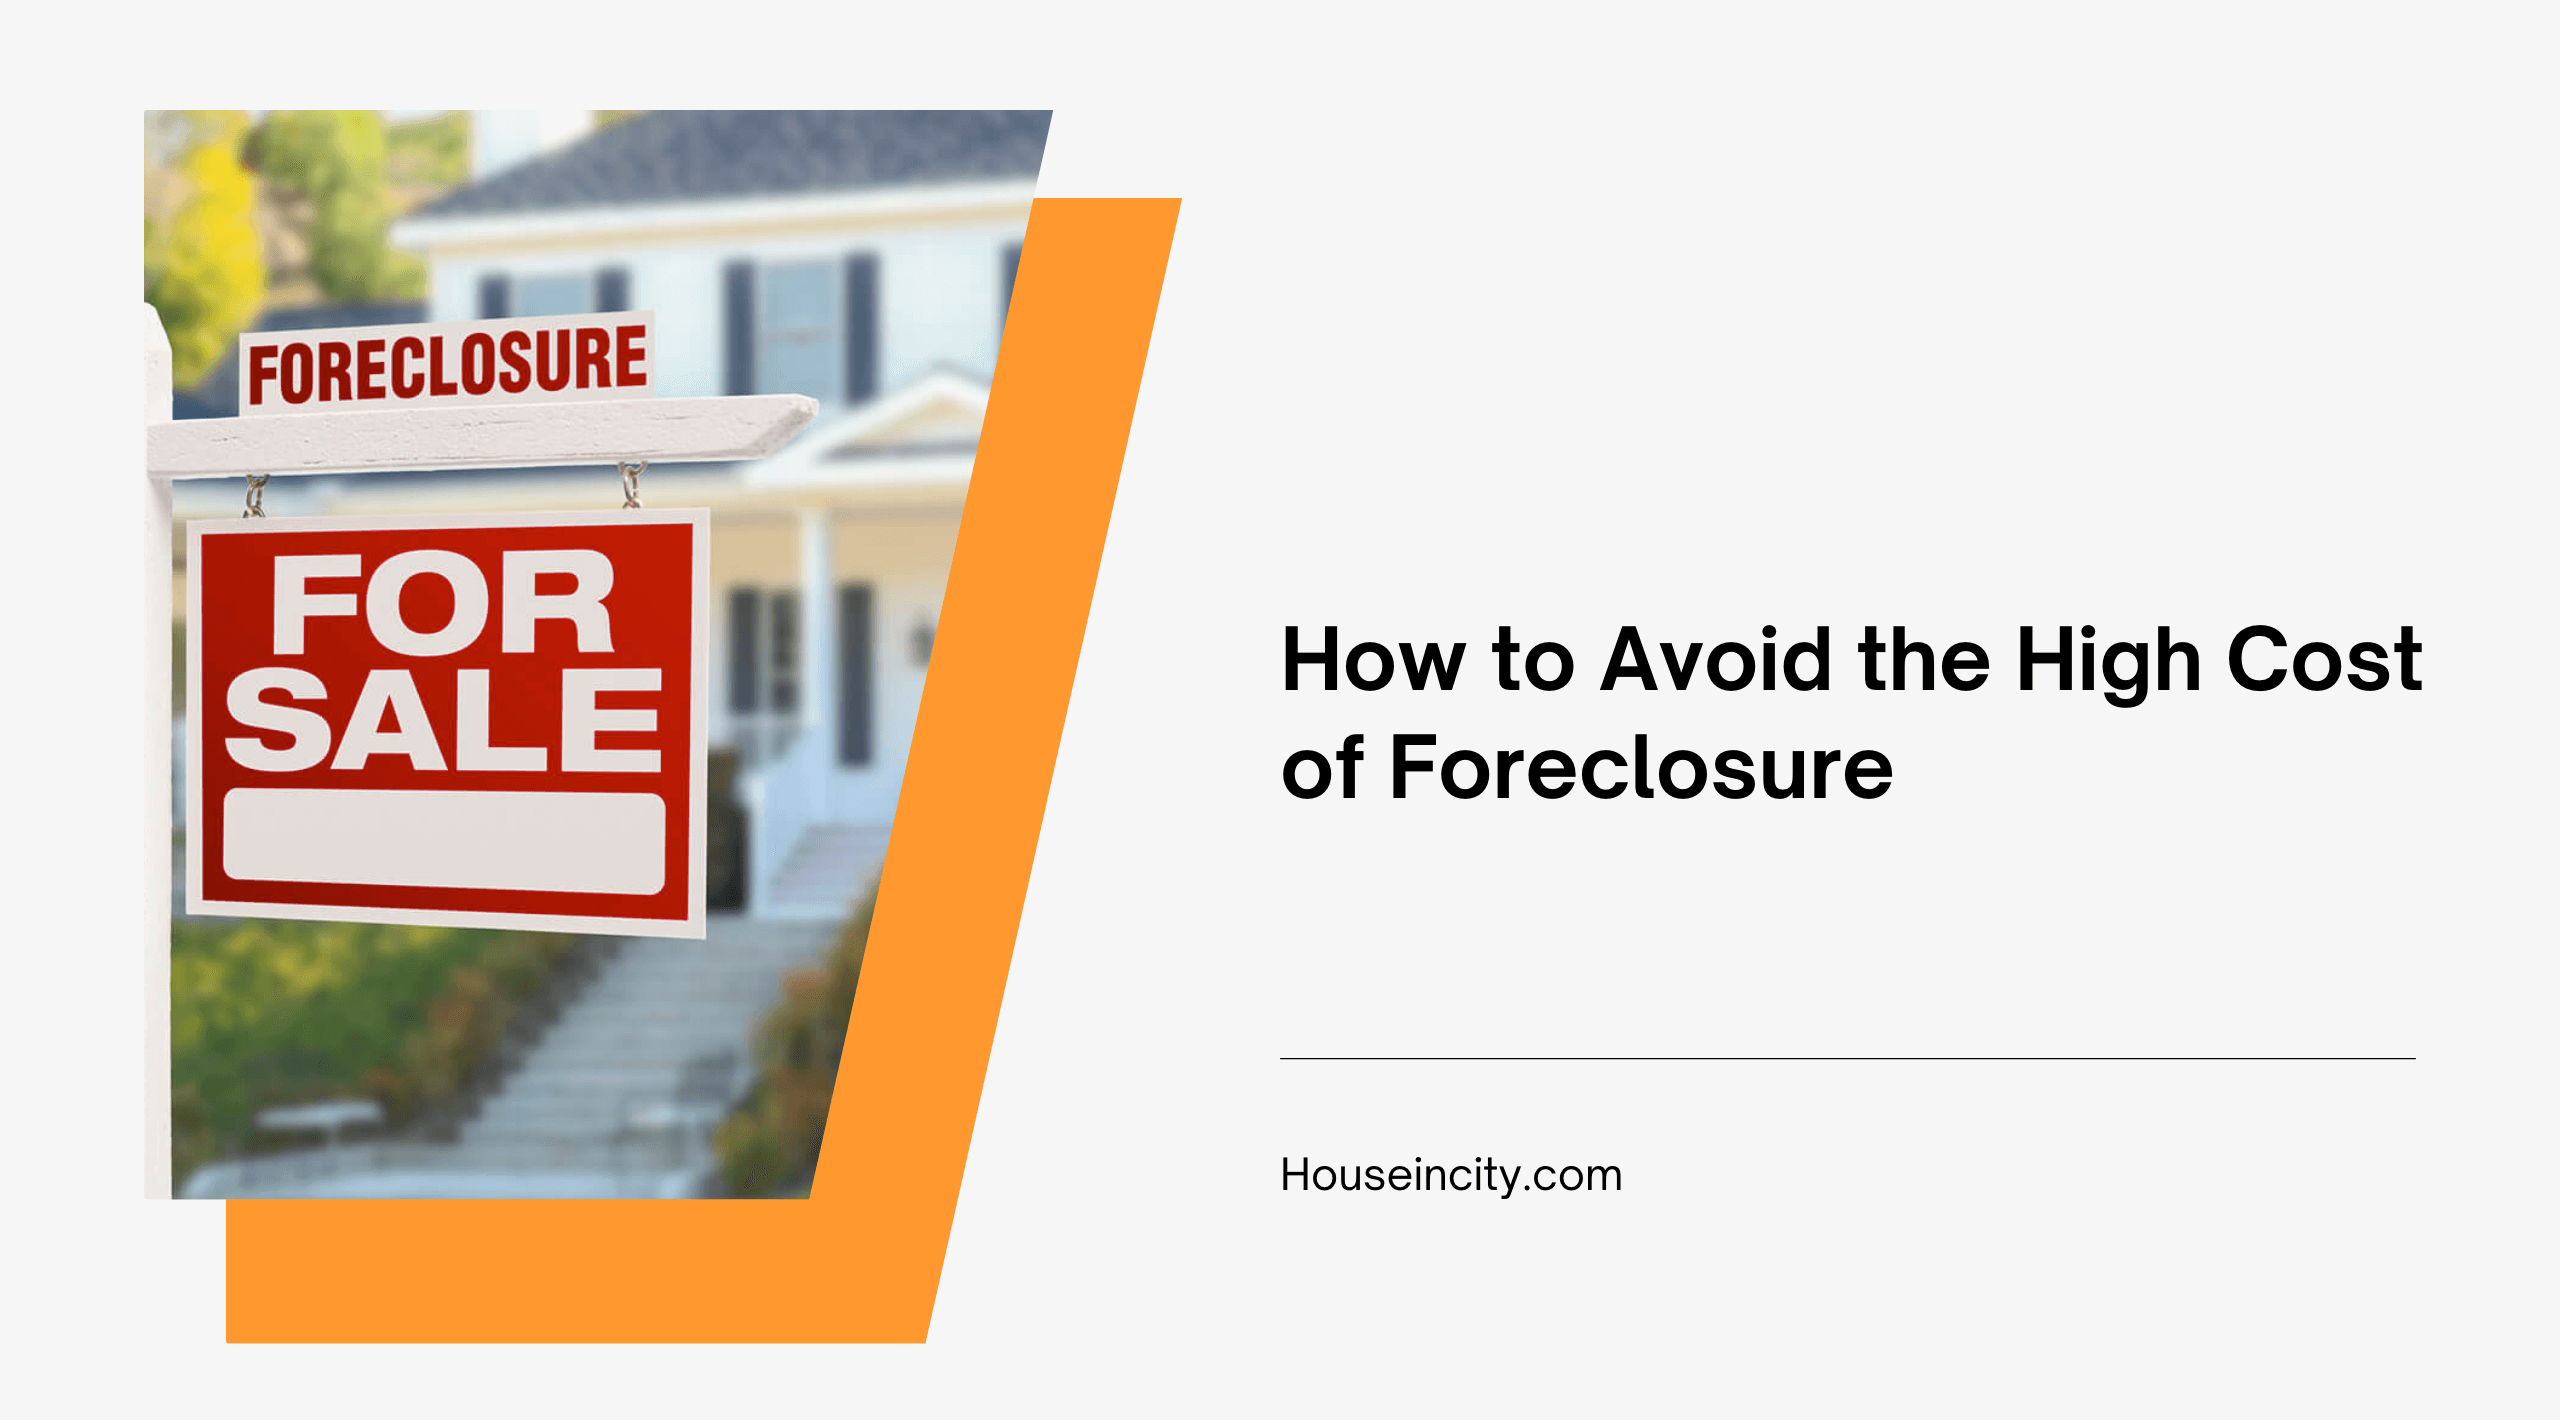 How to Avoid the High Cost of Foreclosure